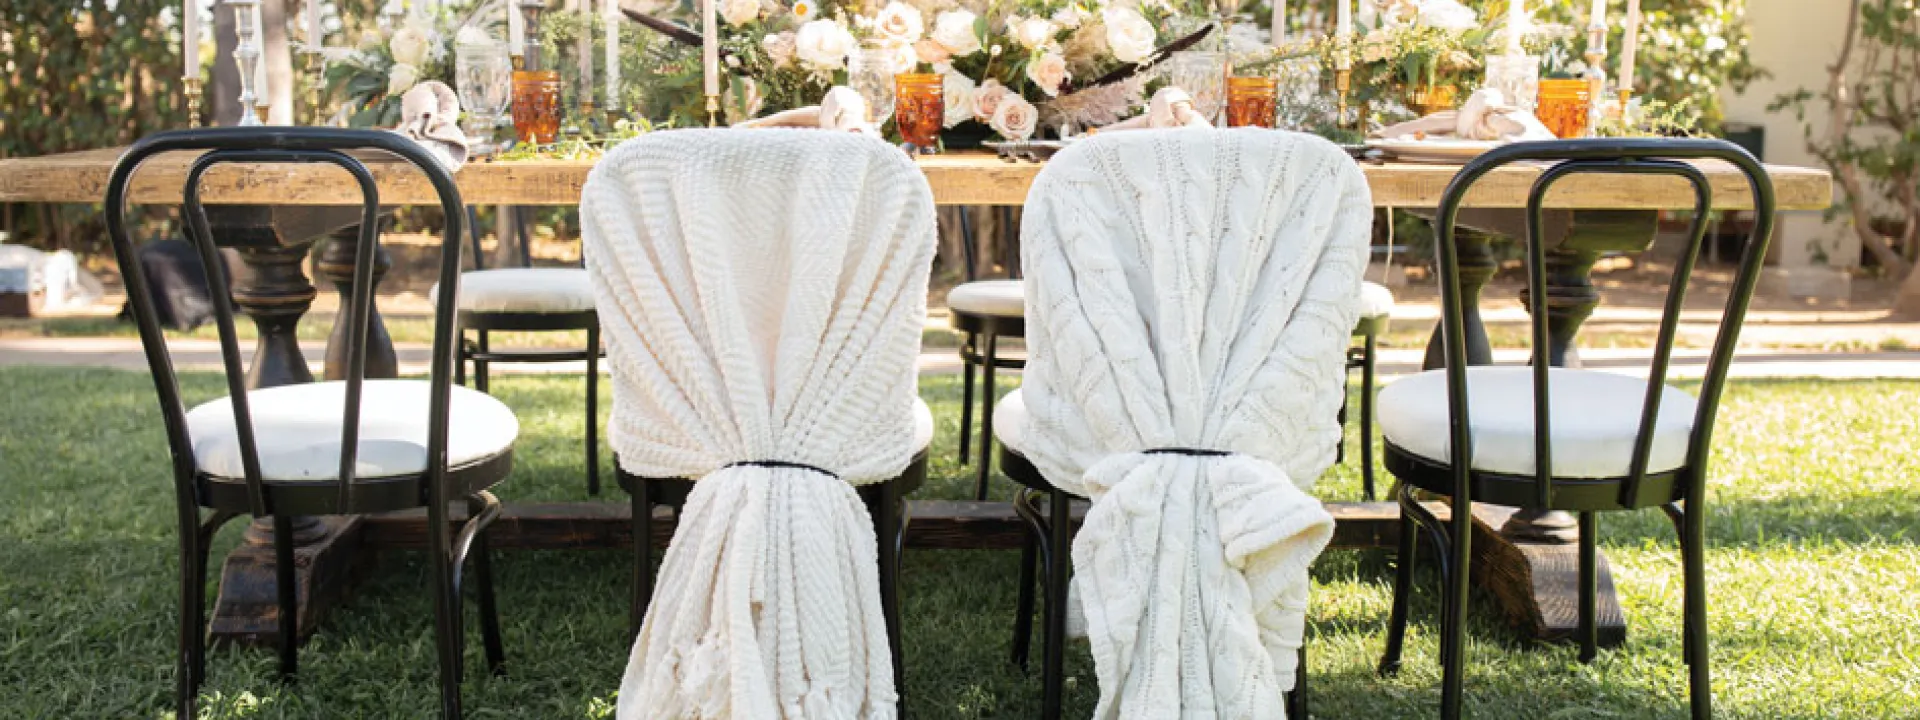 The bride’s and groom’s chairs are wrapped in hygge cable-knit blankets.